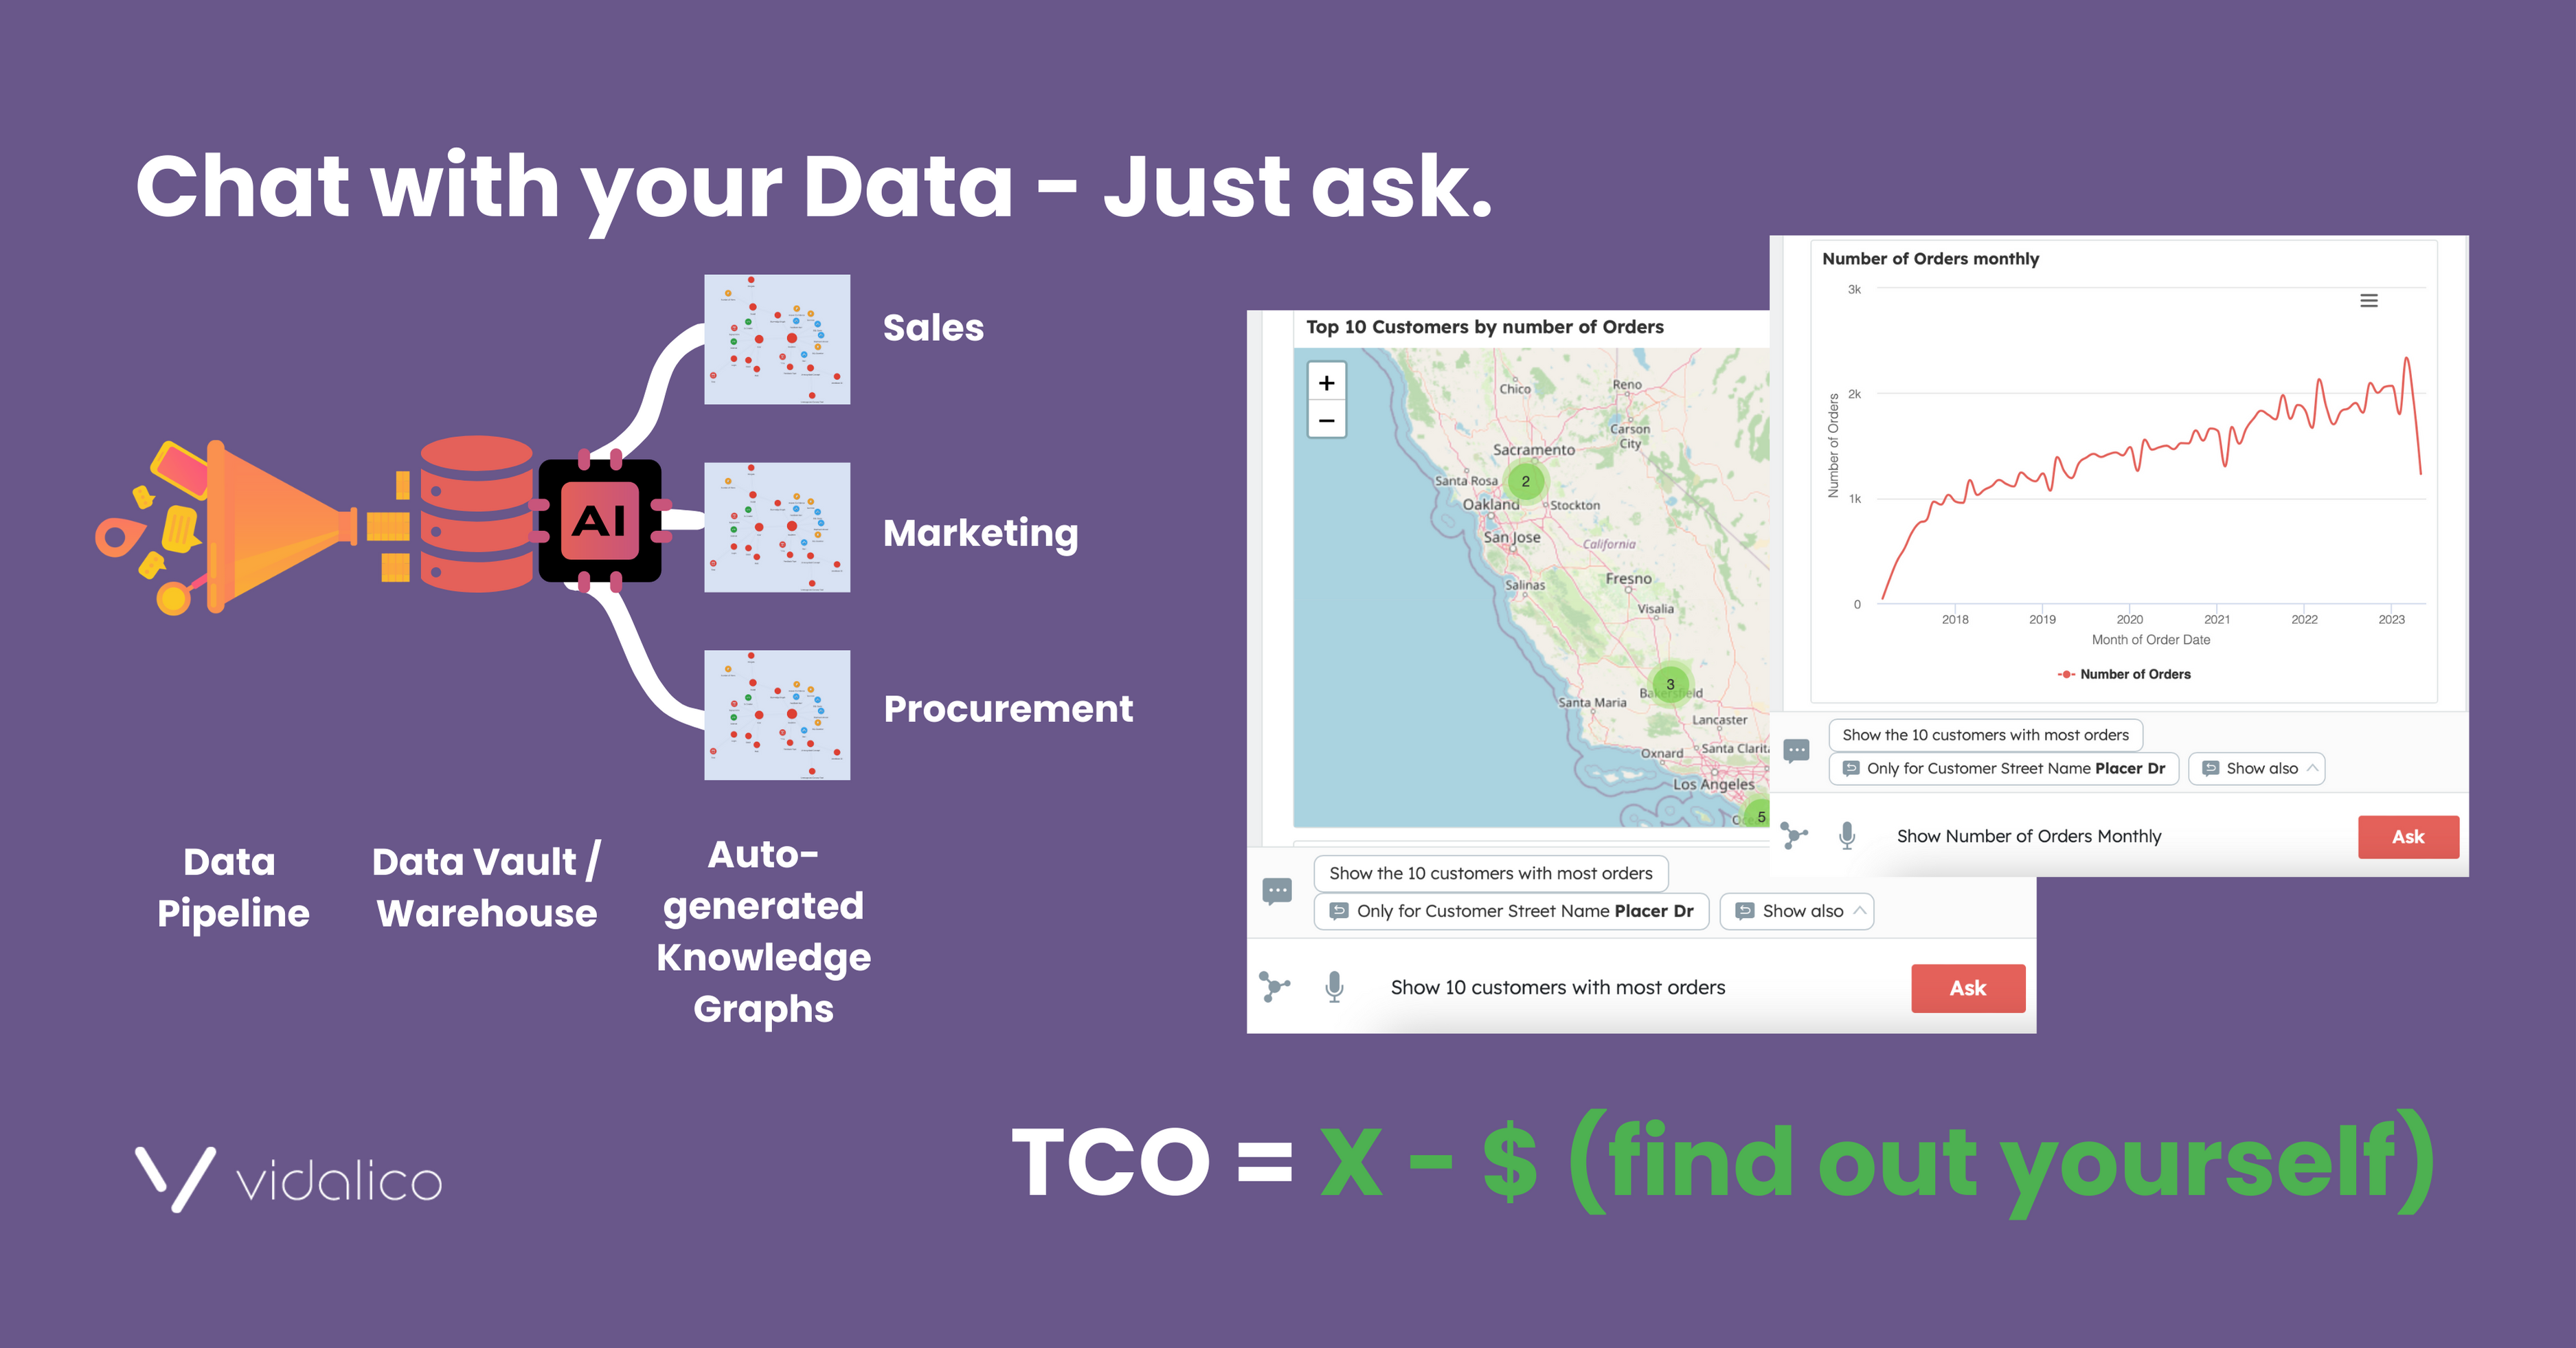 Chat with your Data - Reduce your TCO of Business Intelligence and Analytics